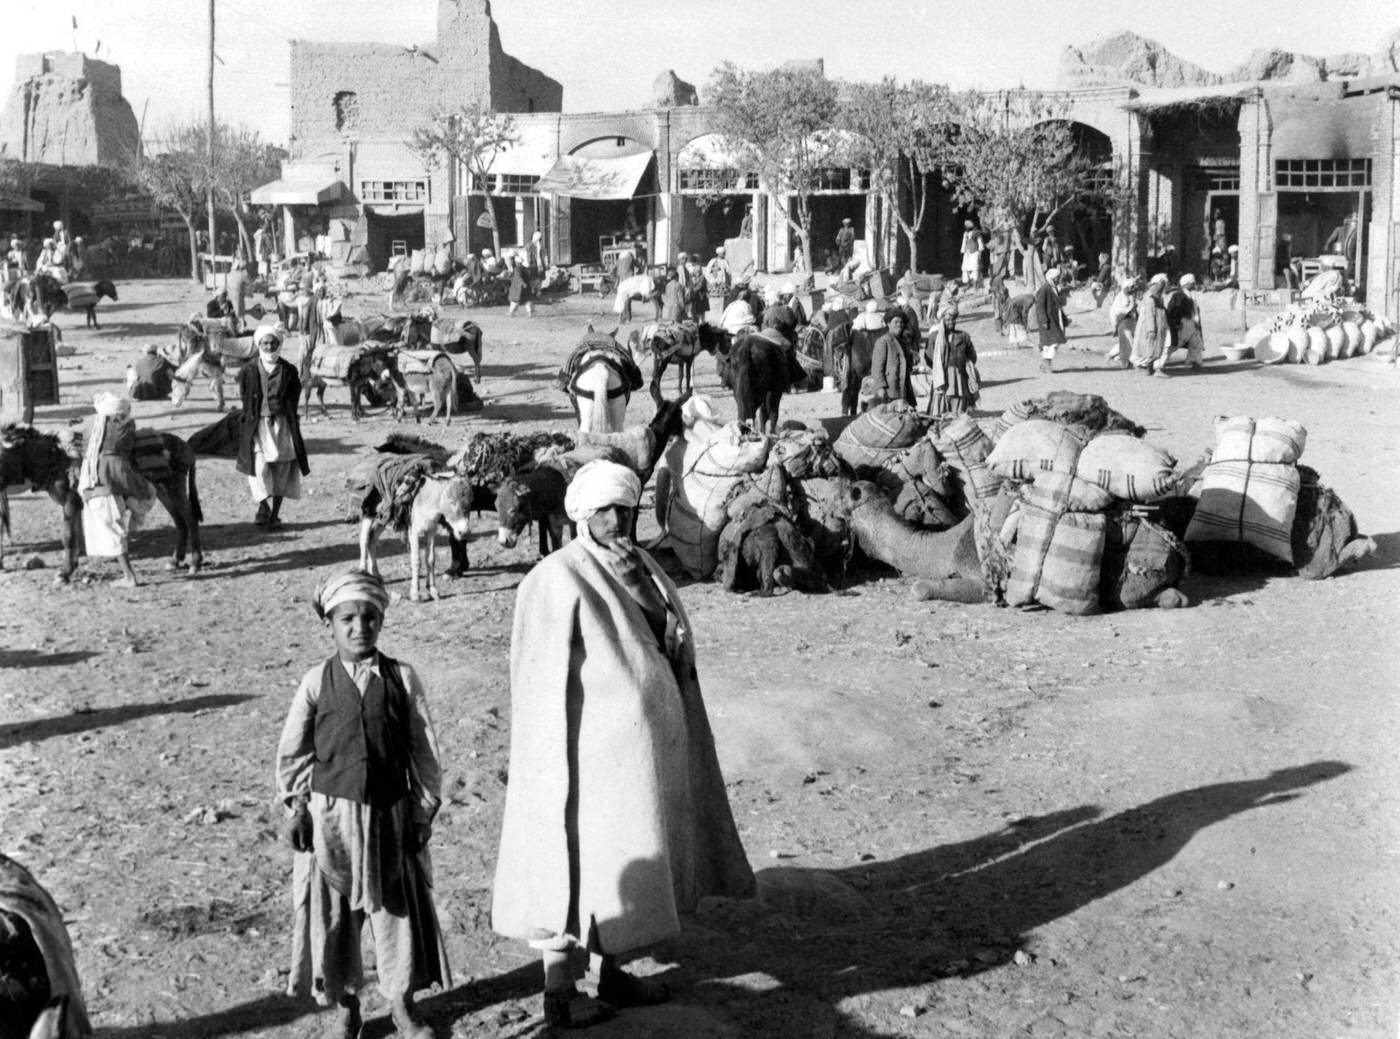 Mules and camels assembling in the market place in Herat, 1955.